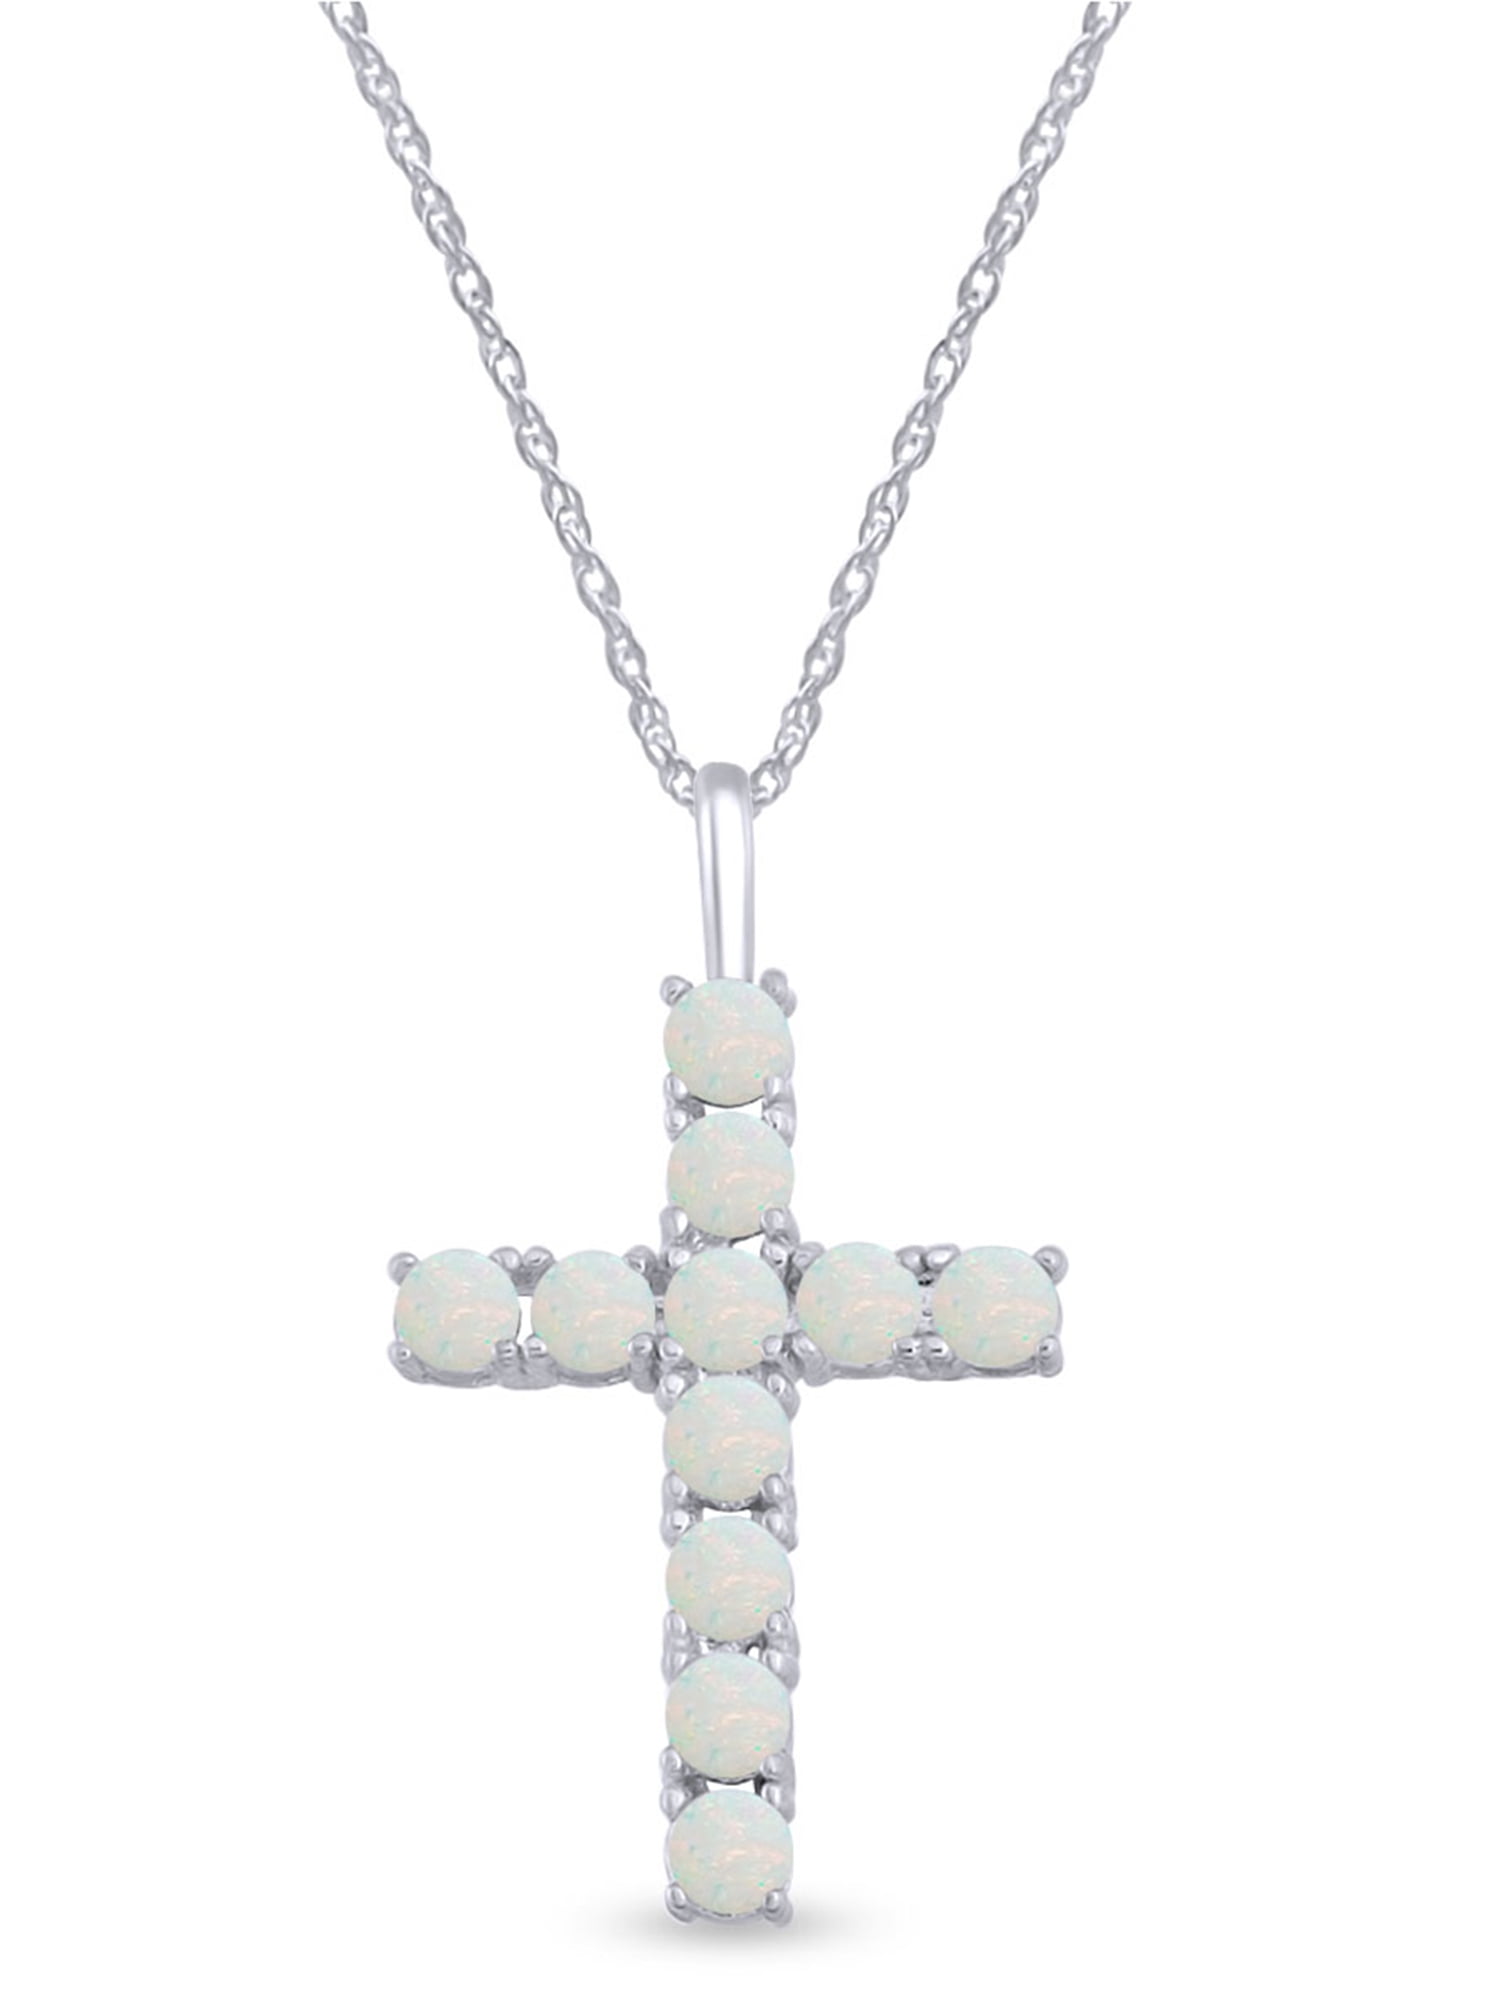 Round Cut CZ Crystal Cross Crucifix Pendant Solid .925 Sterling Silver Necklace 